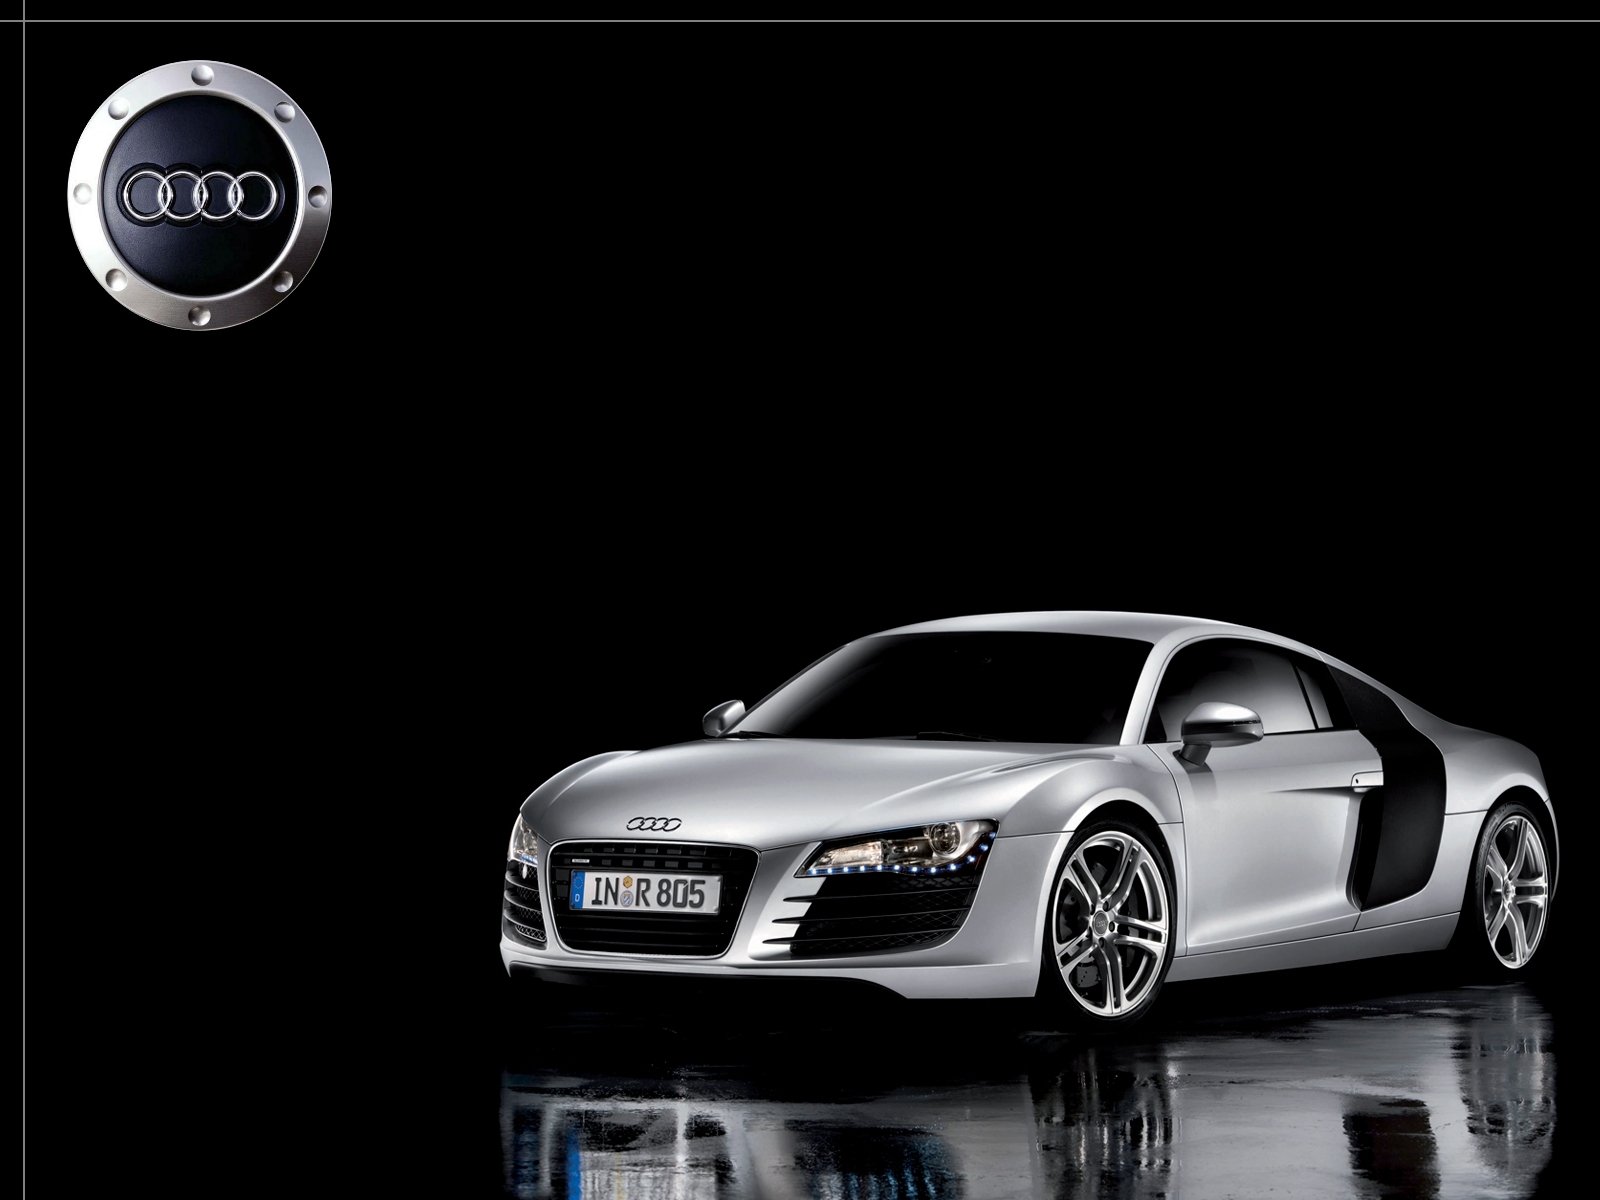  wallpapers audi r8 wallpapers audi r8 wallpapers audi r8 wallpapers